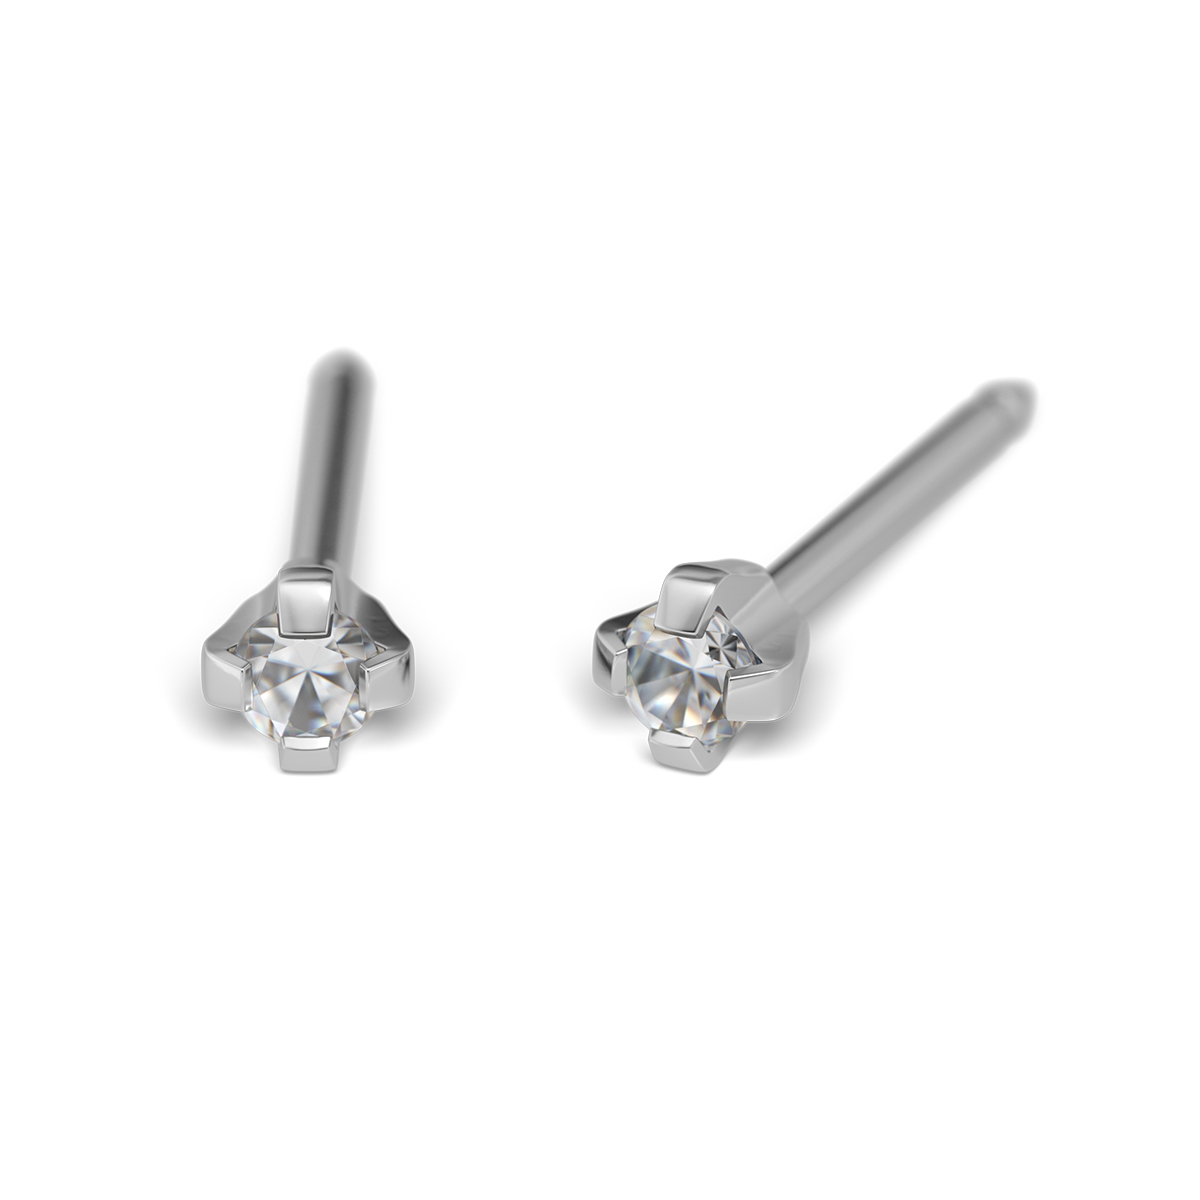 System 75 ear studs, 14 ct yellow gold white rhodium plated